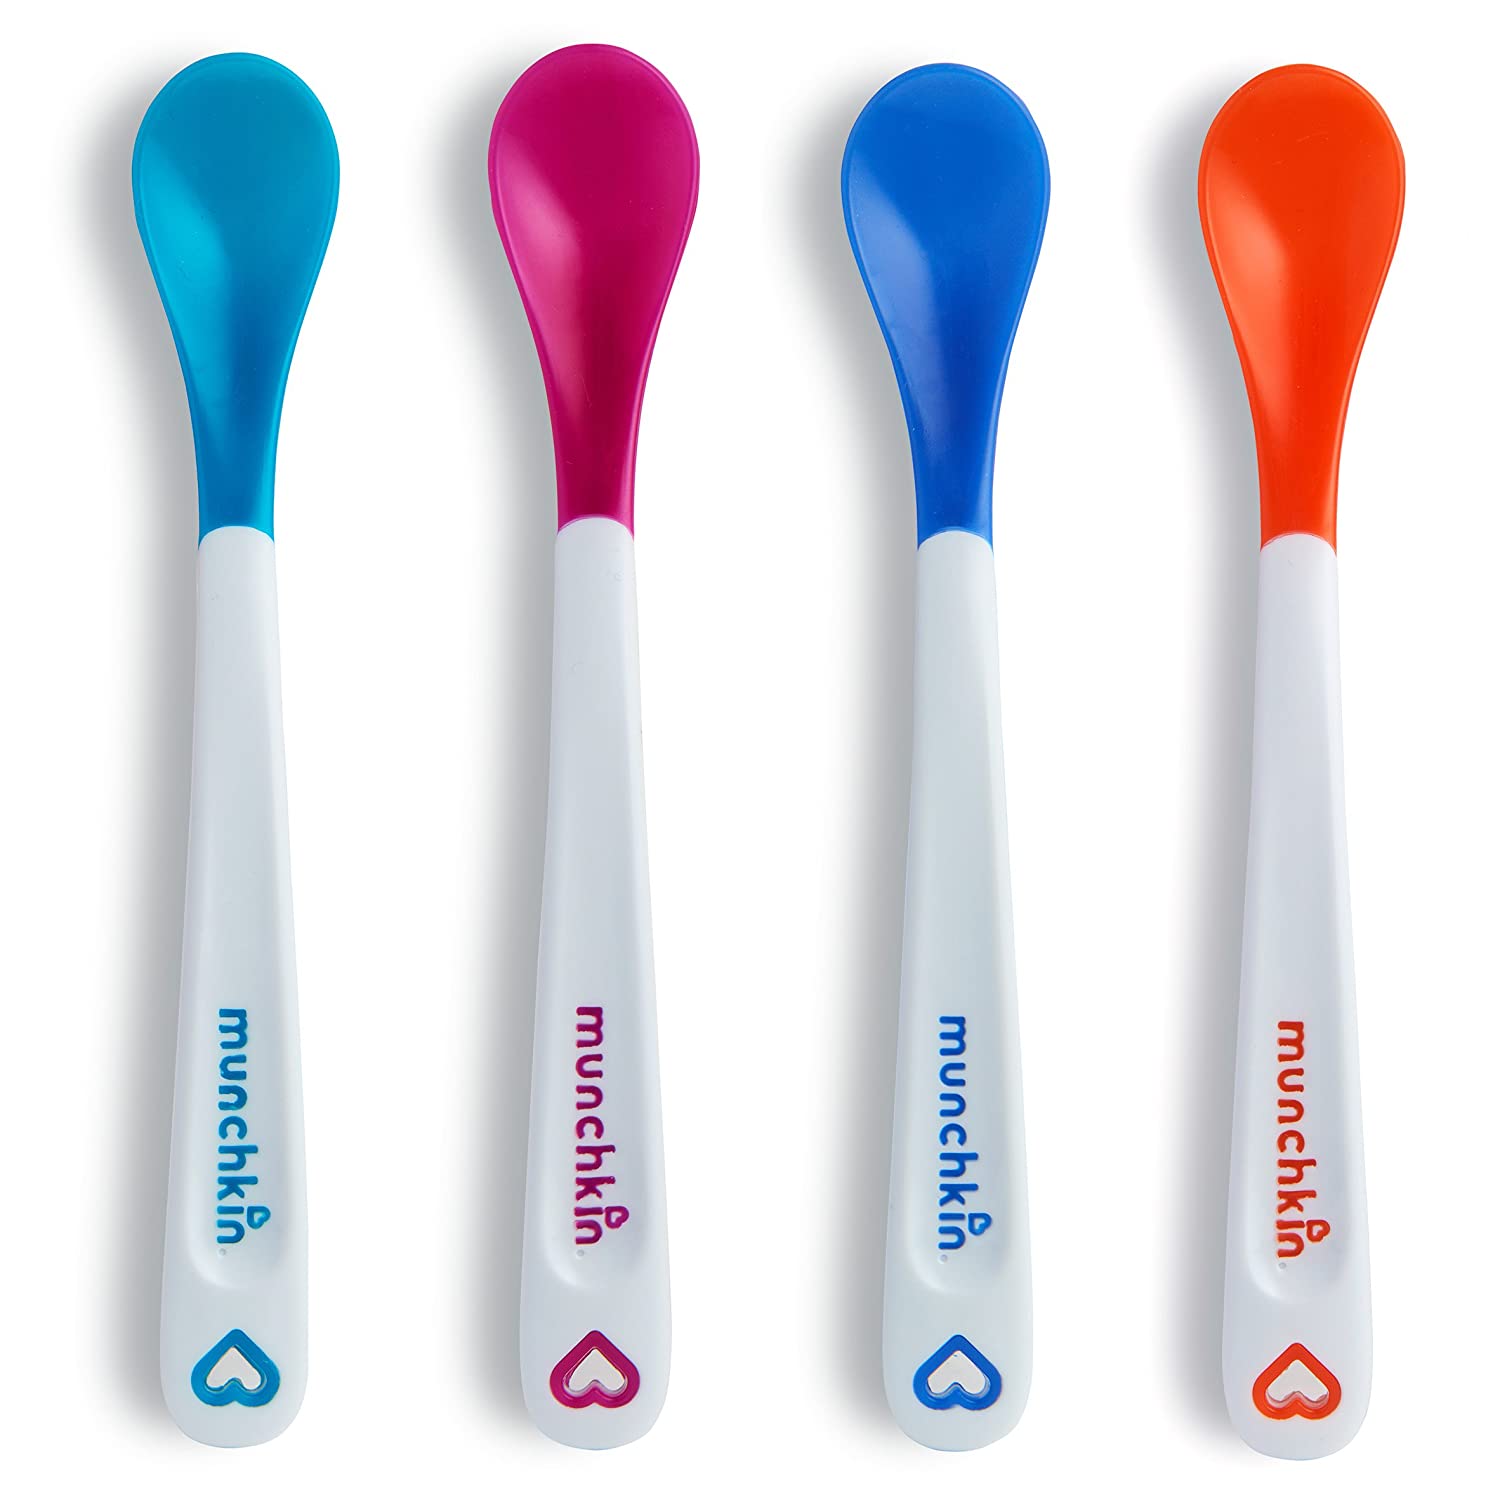 Top 9 Best Baby Spoons for Self Feeding Reviews in 2022 6